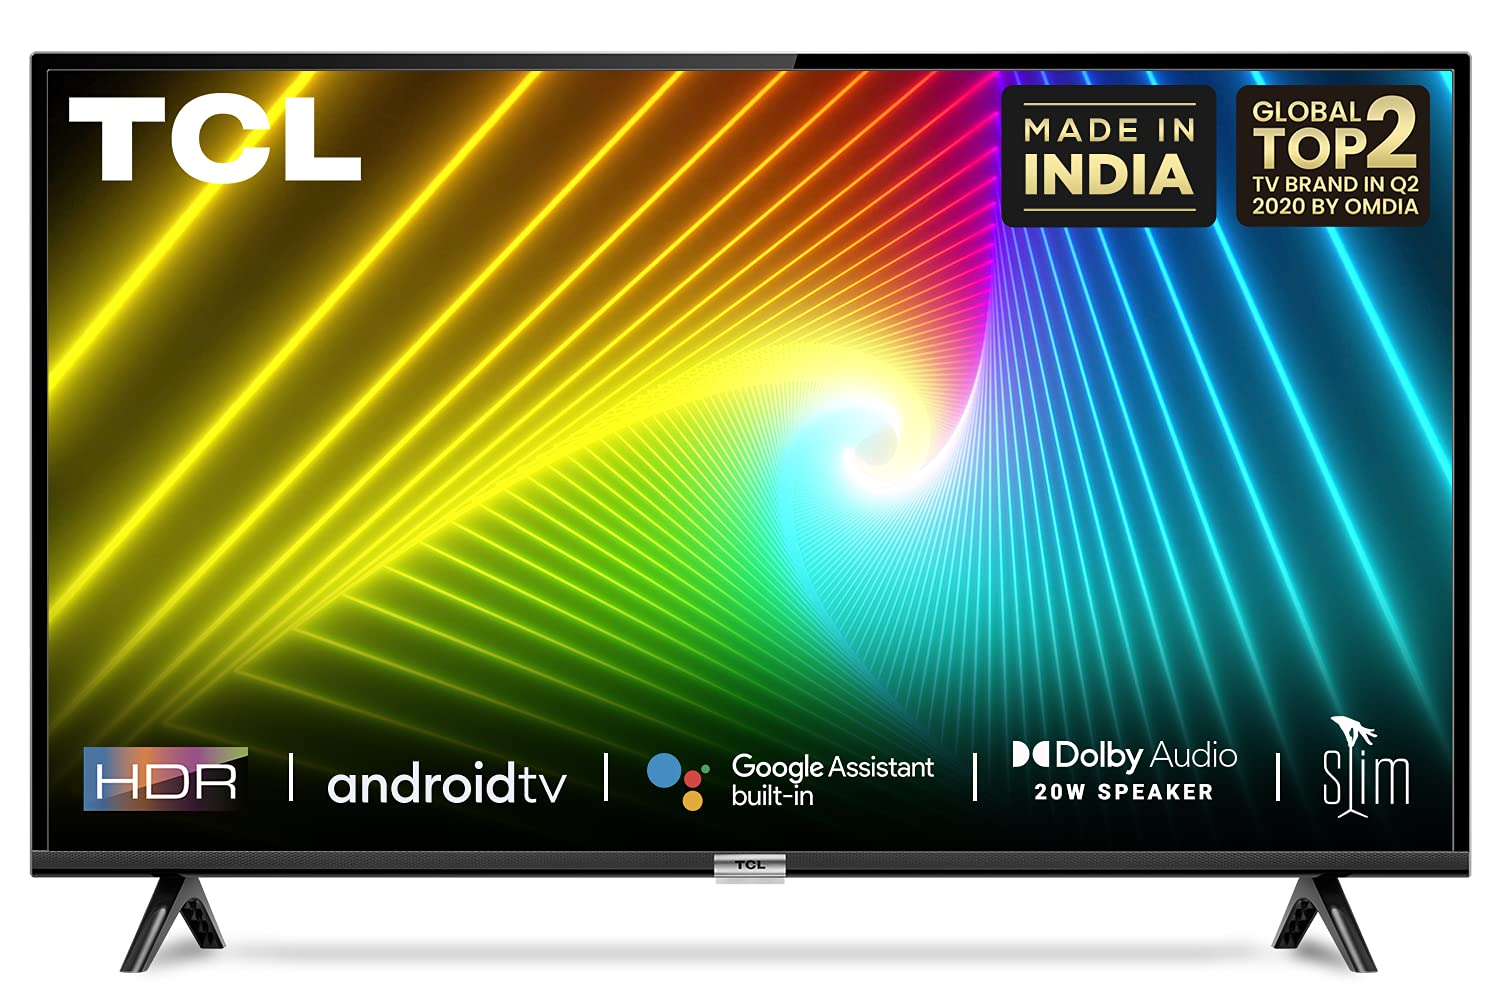 Amazon Festival Sale: Take advantage of Amazon's sale, take home branded smart TVs, phones and laptops at half price